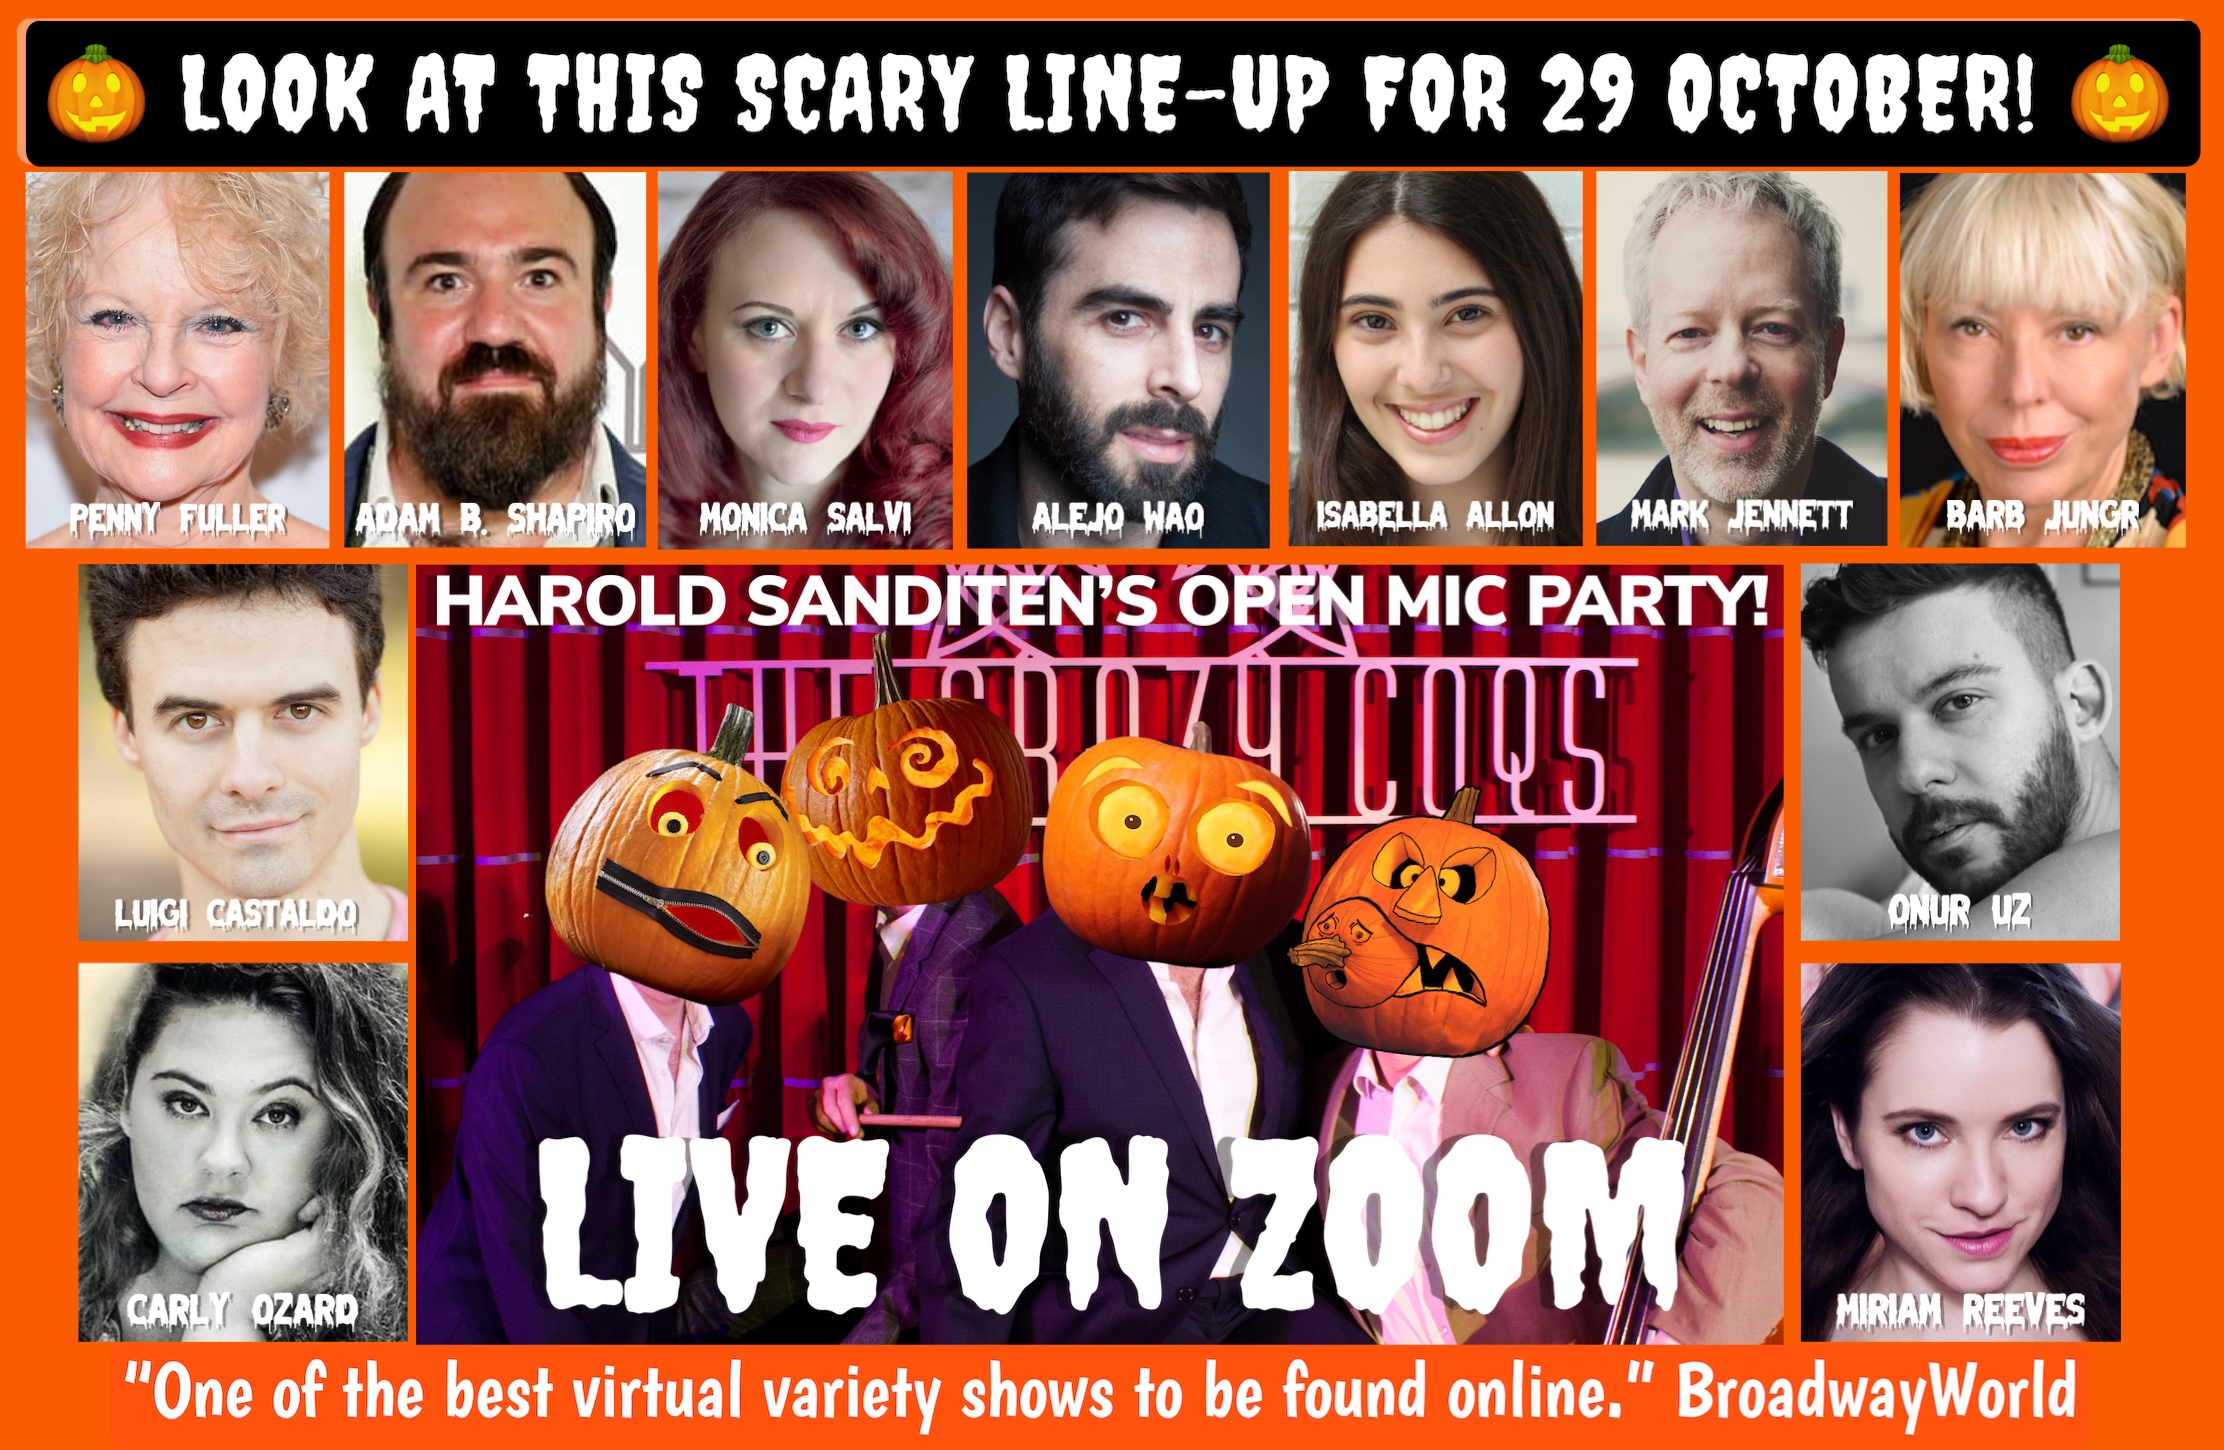 Here's the line-up for our Halloween special on 29 October